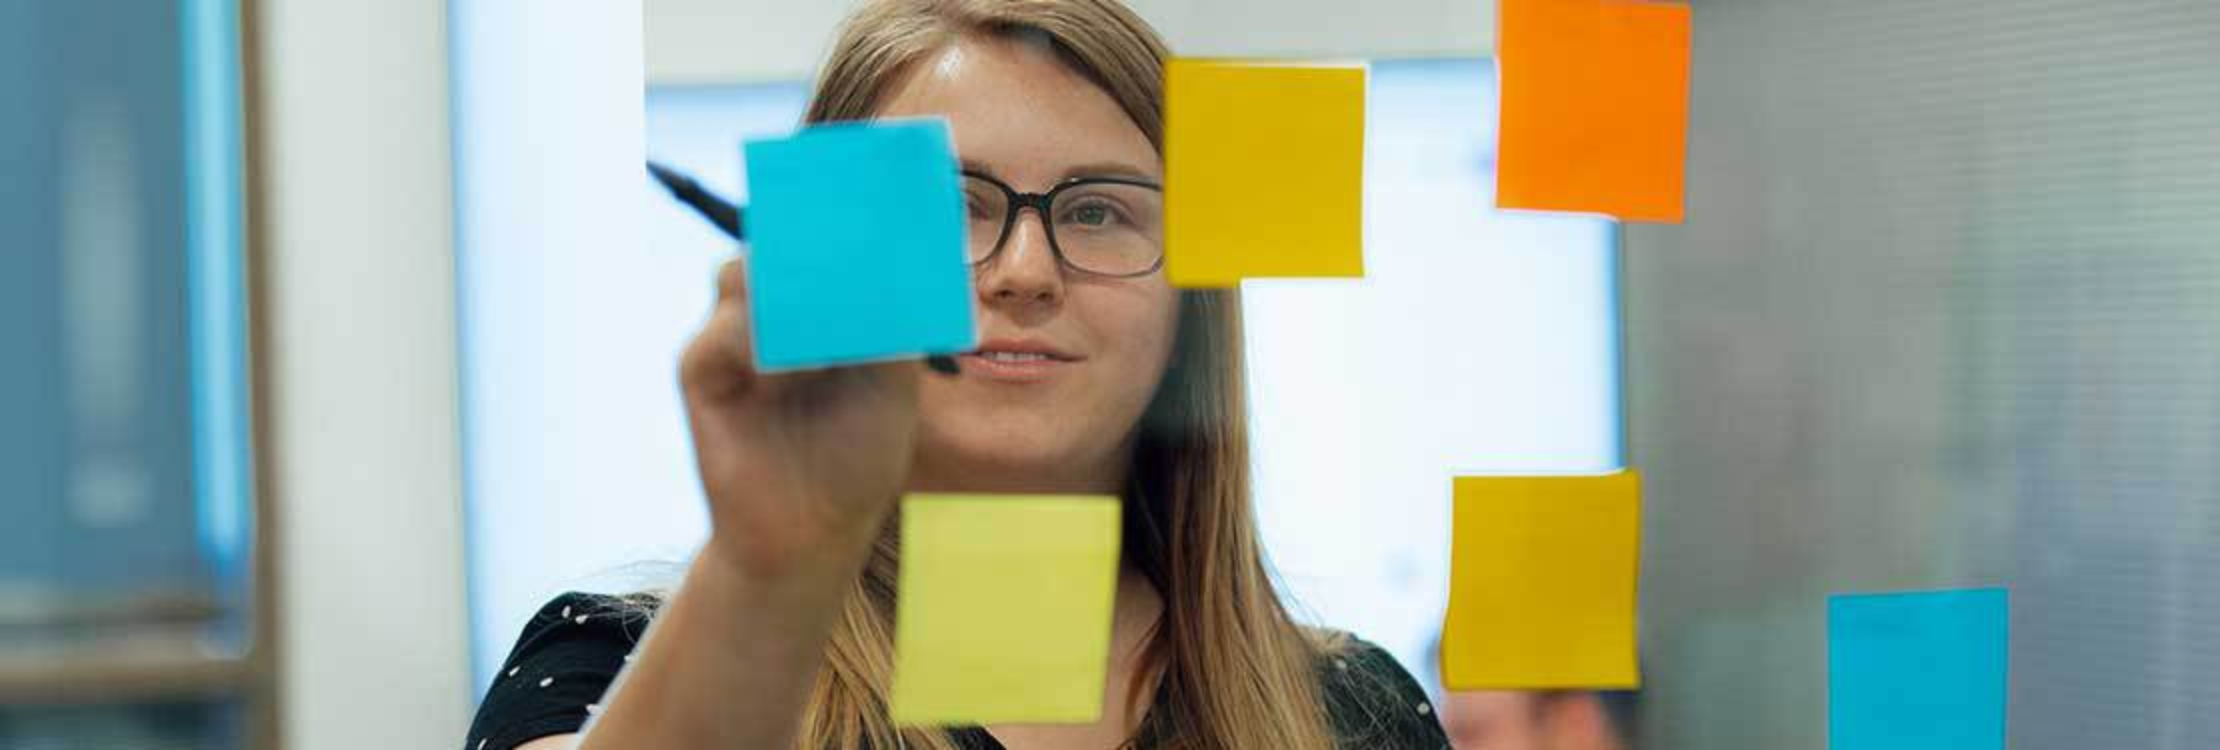 Student using post-it notes